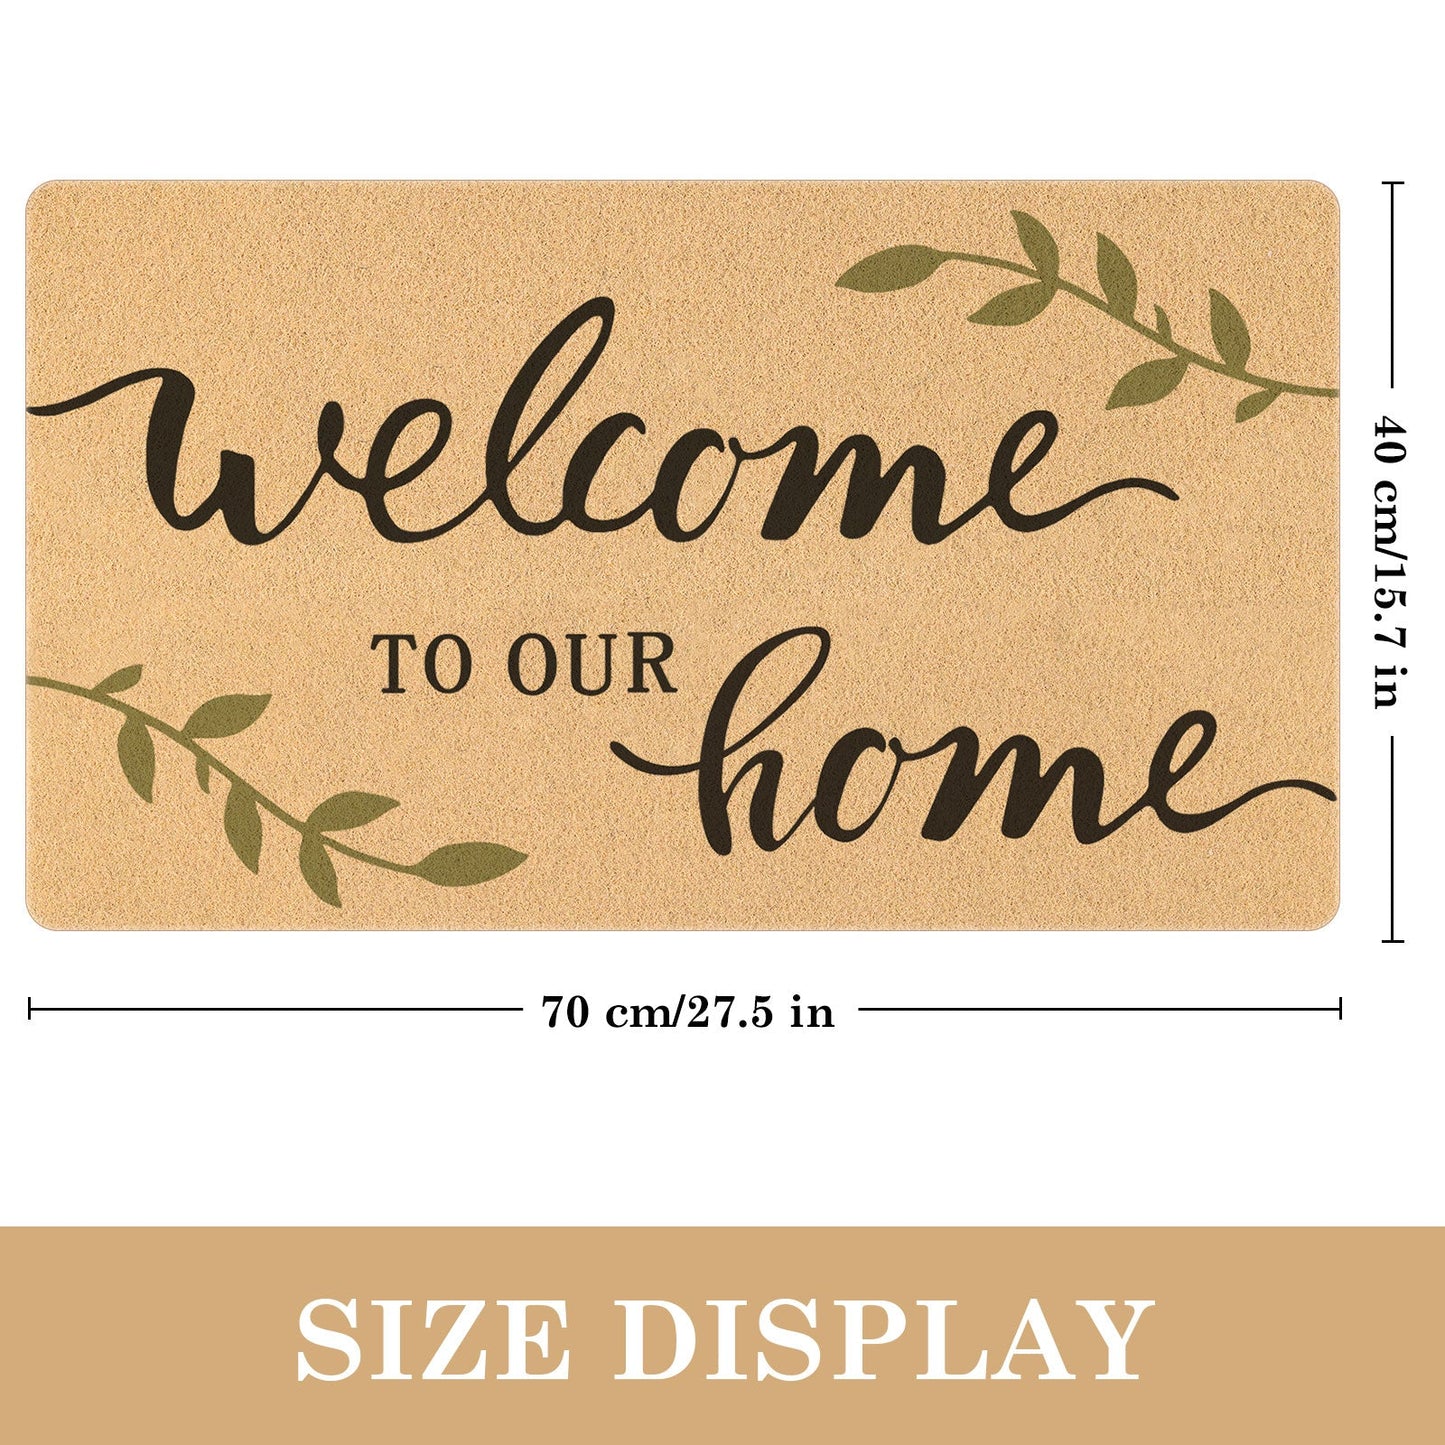 Feblilac Hello Gorgeous White Ground Door mat, Quotation Welcome Doorm –  Feblilac® Mat